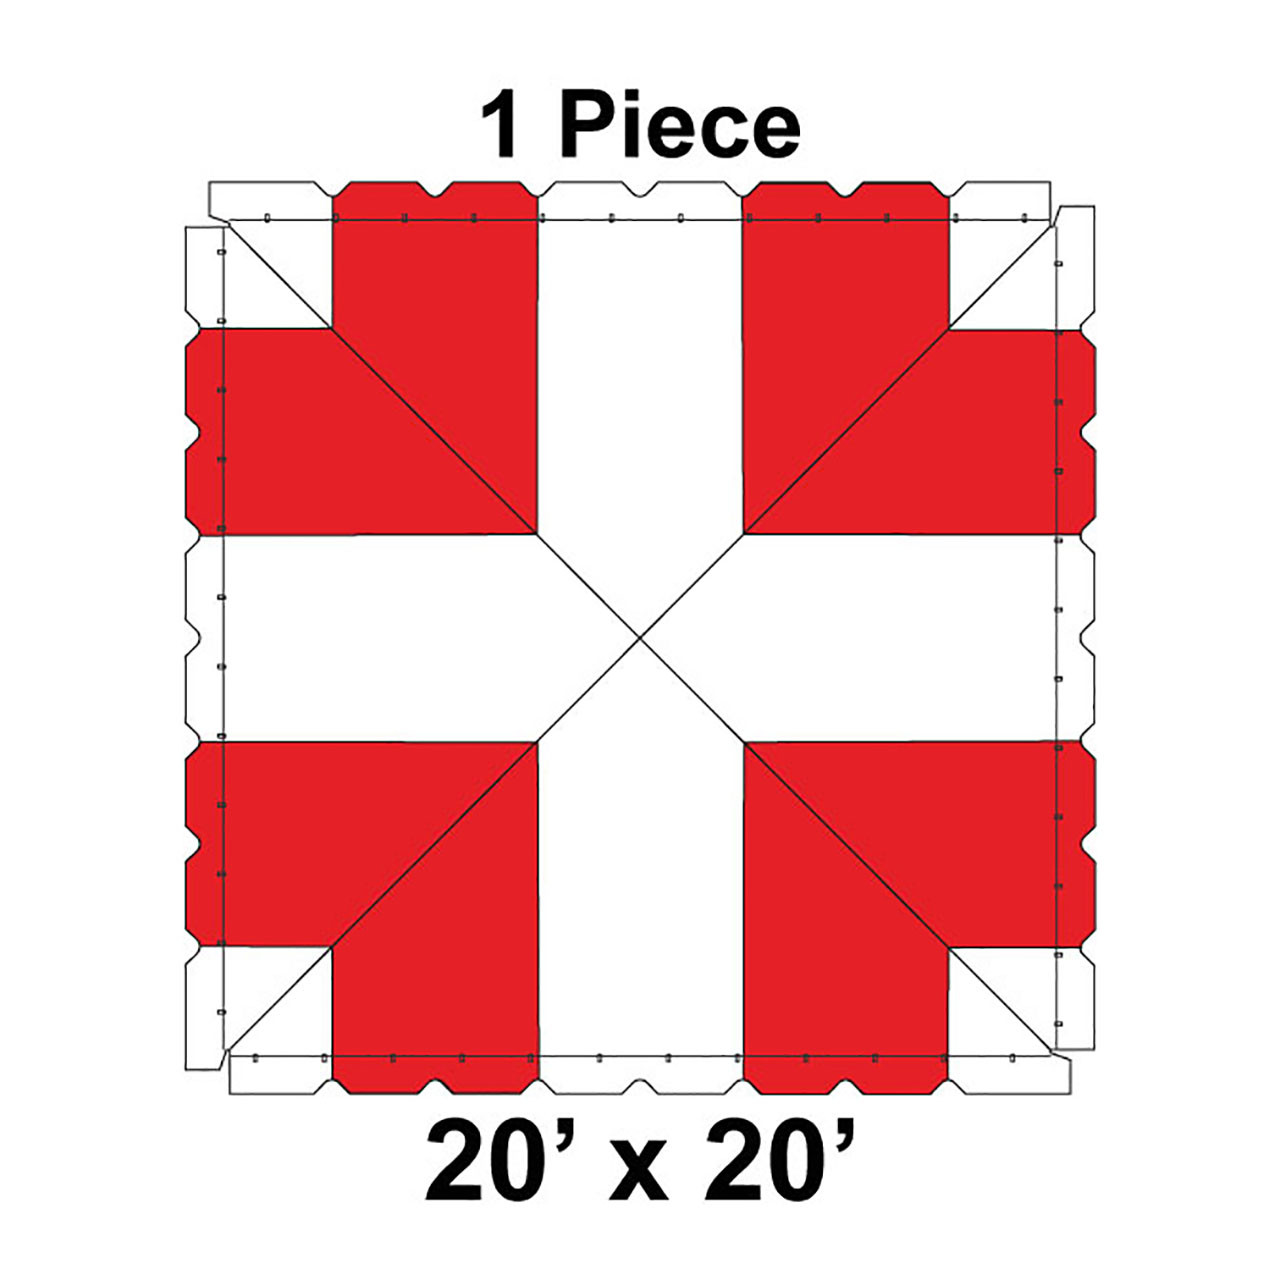 20' x 20' Classic Frame Tent, 1 Piece, 16 oz. Ratchet Top, White and Red